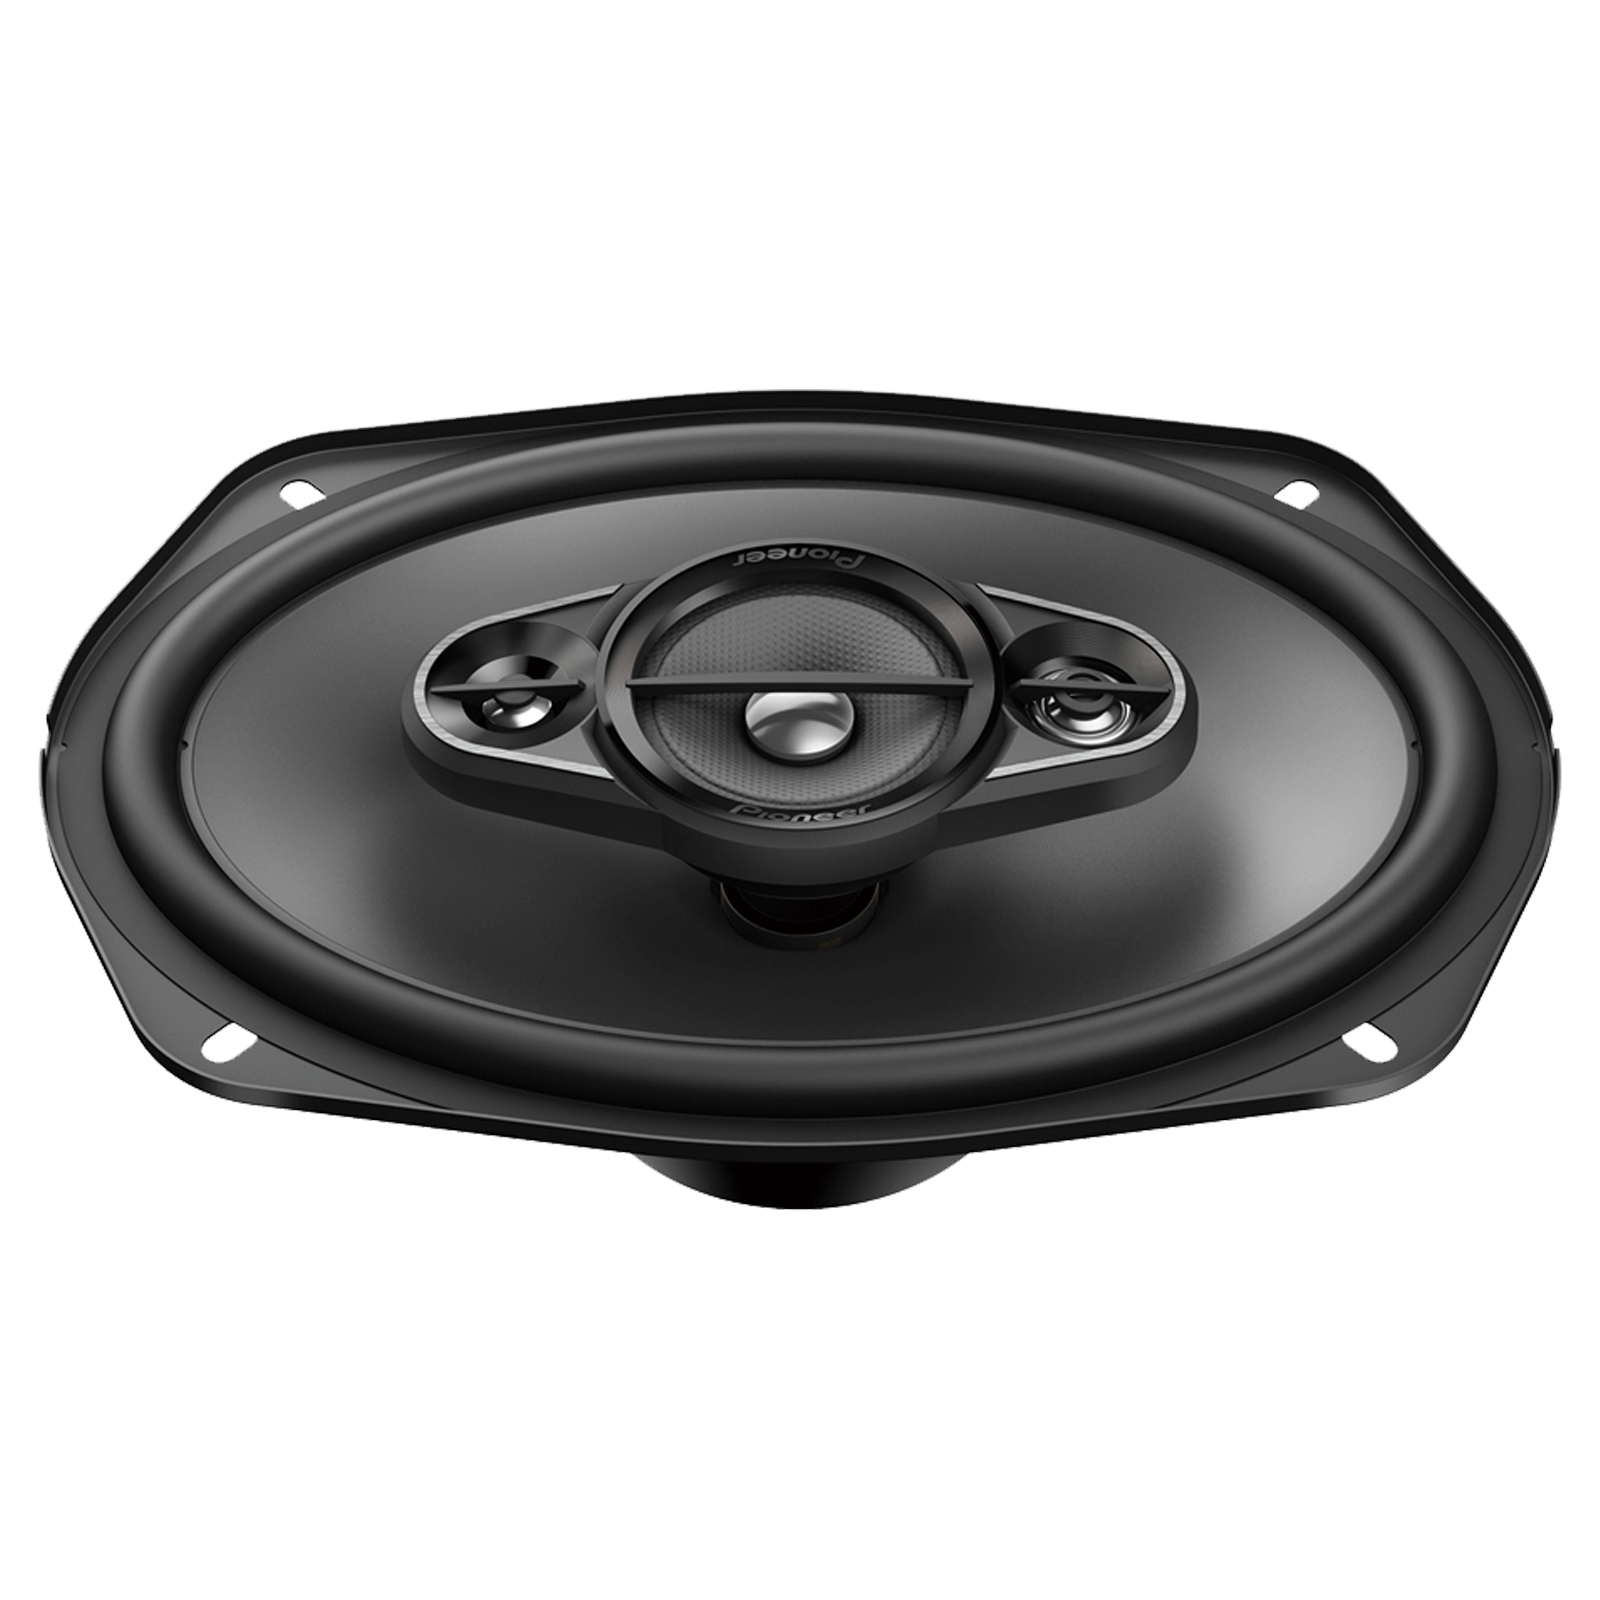 Pioneer TS-A6967S A-Series 6x9" shallow 4-Way 450 Watts Max Power Black Car Audio Speakers (Pair) - image 3 of 4